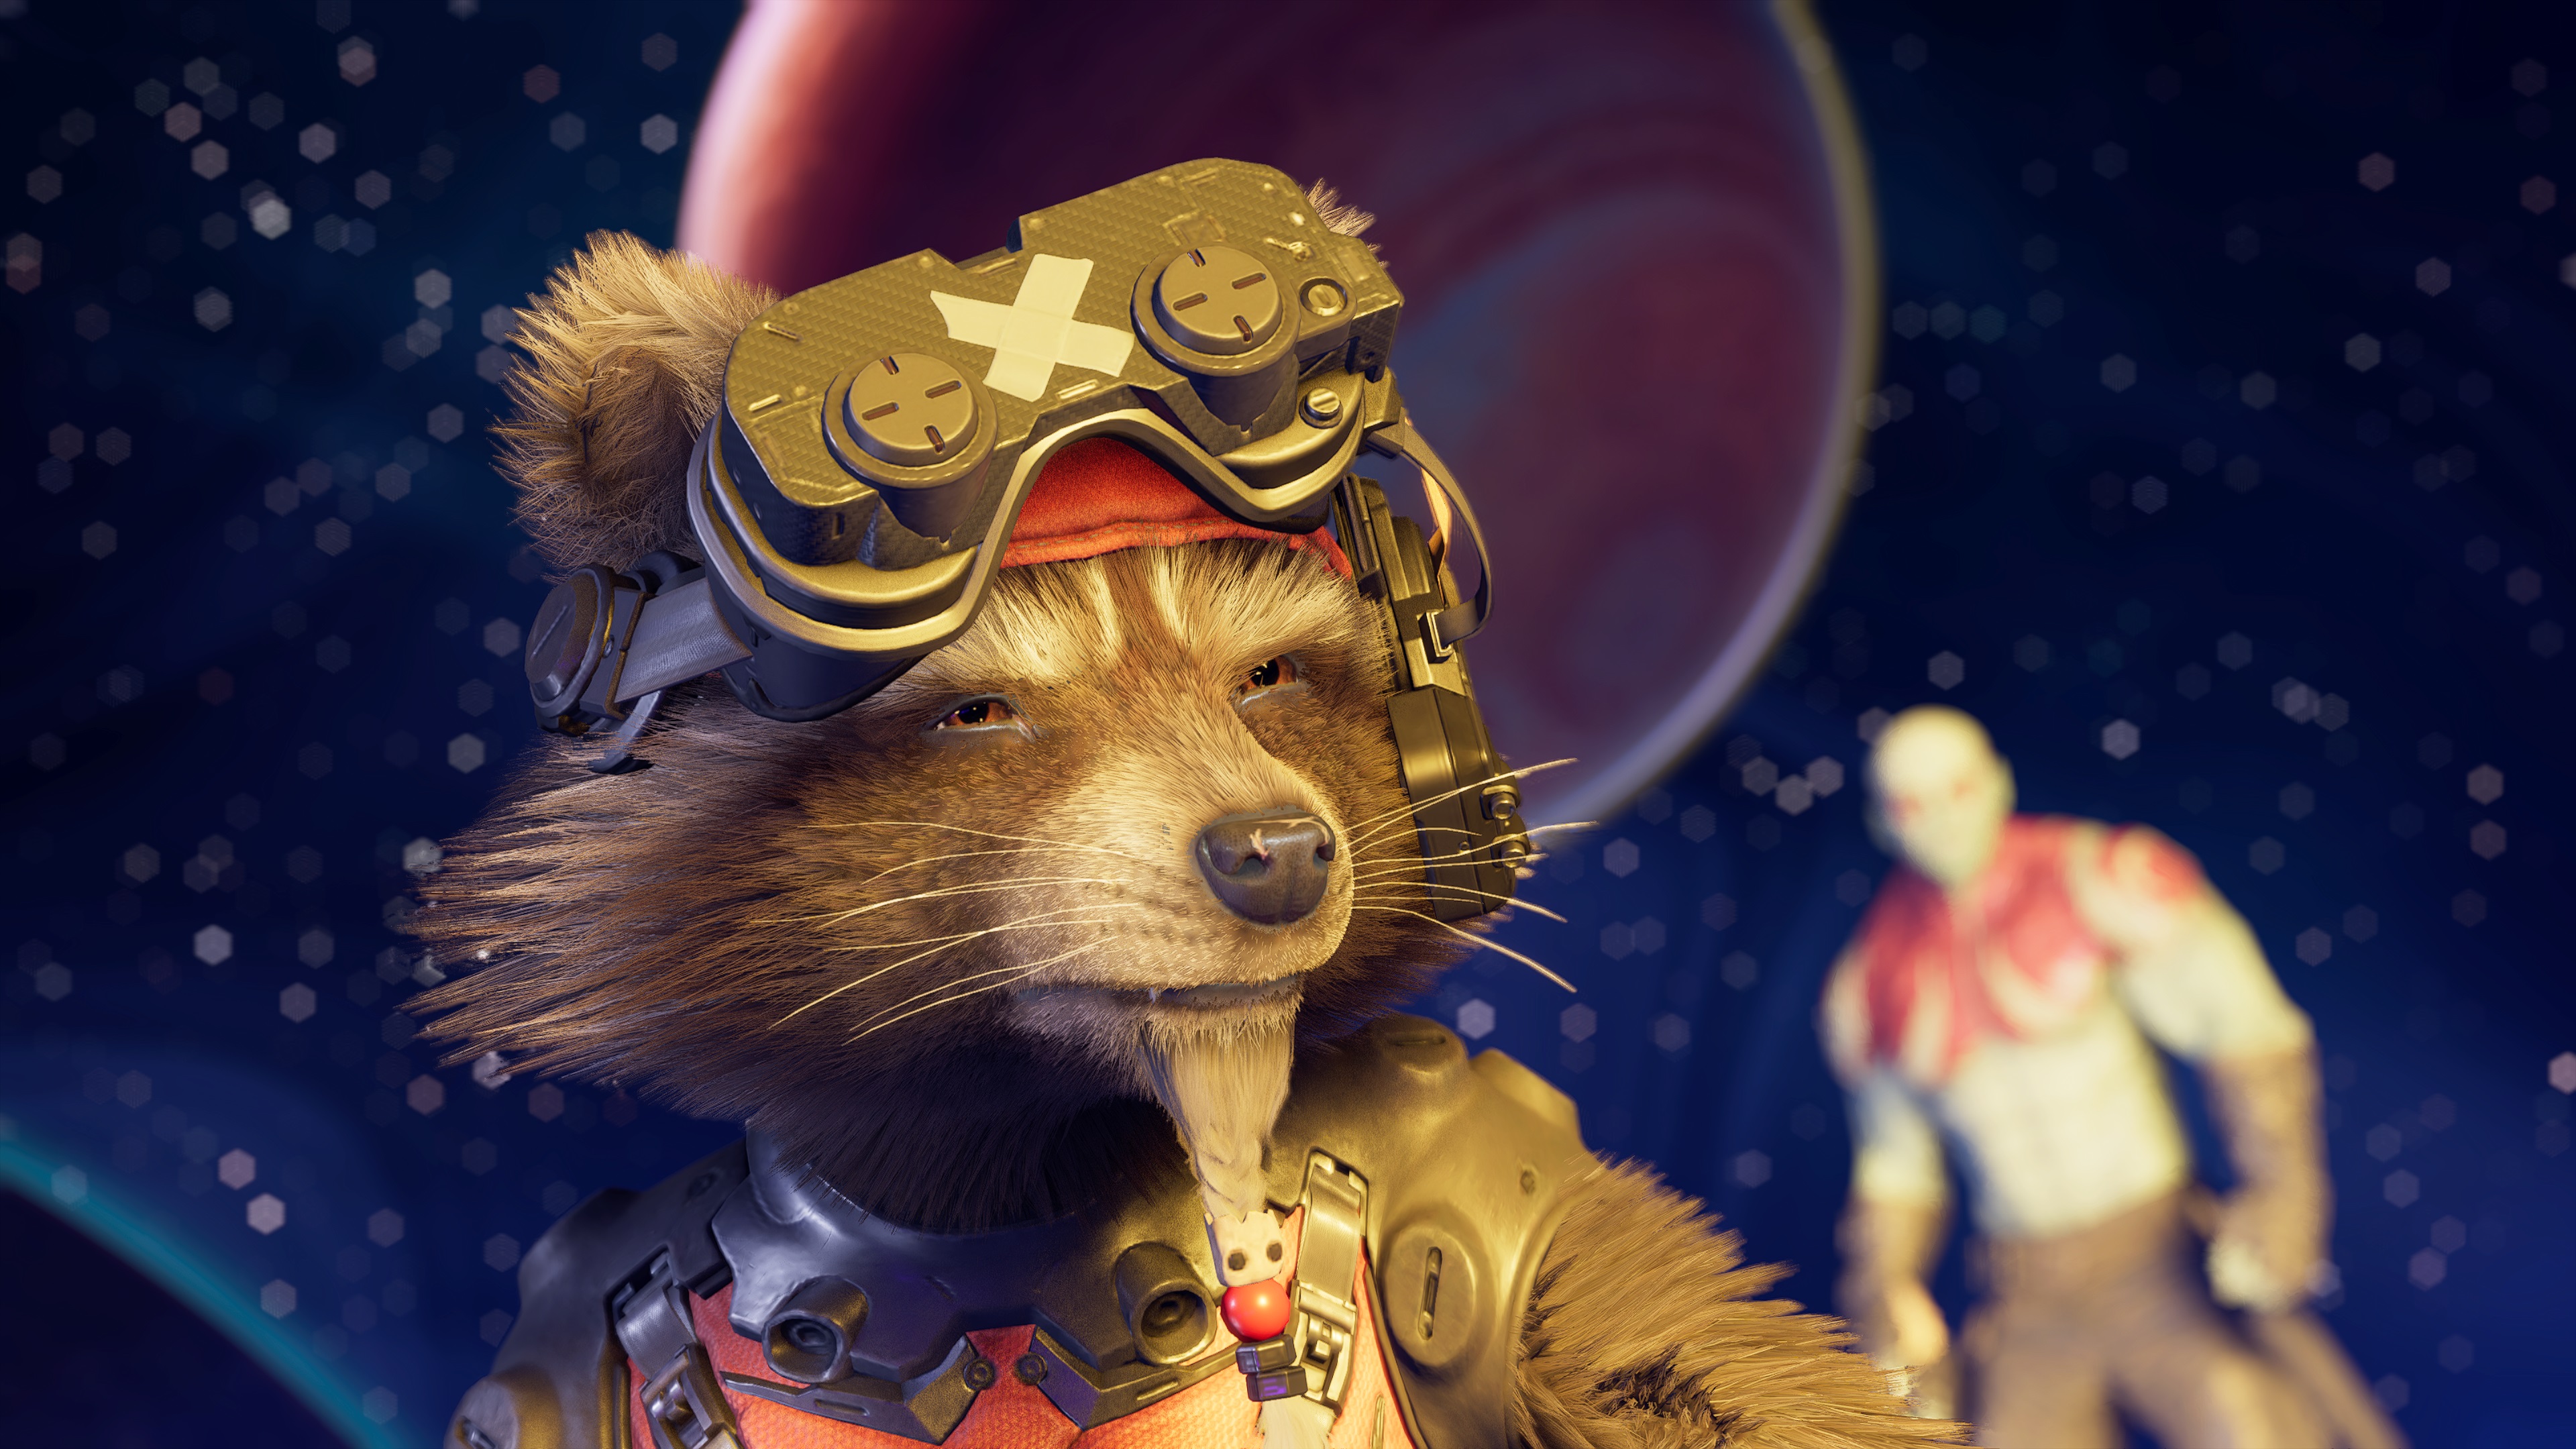 Rocket and Groot are exceptionally well designed.